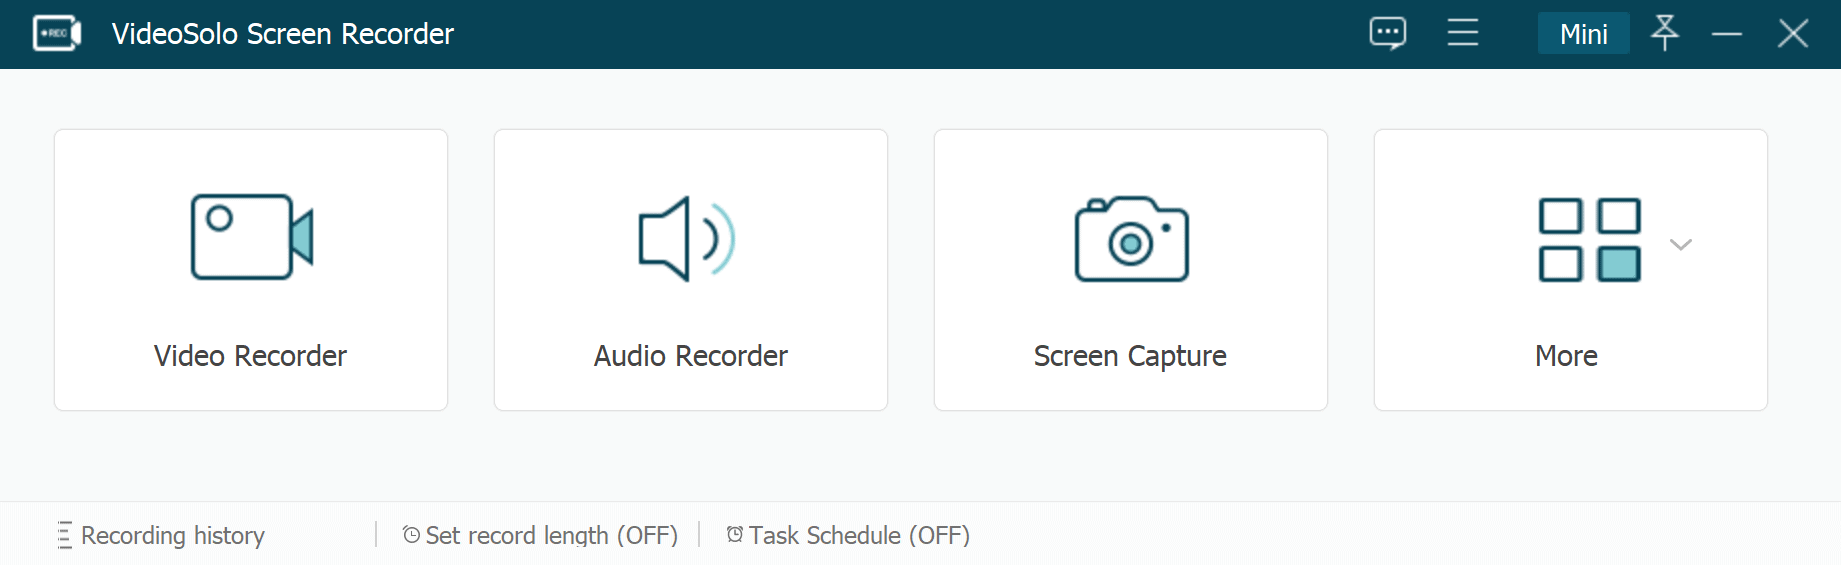 VideoSolo Screen Recorder – Simplify the Recording Work on Computer